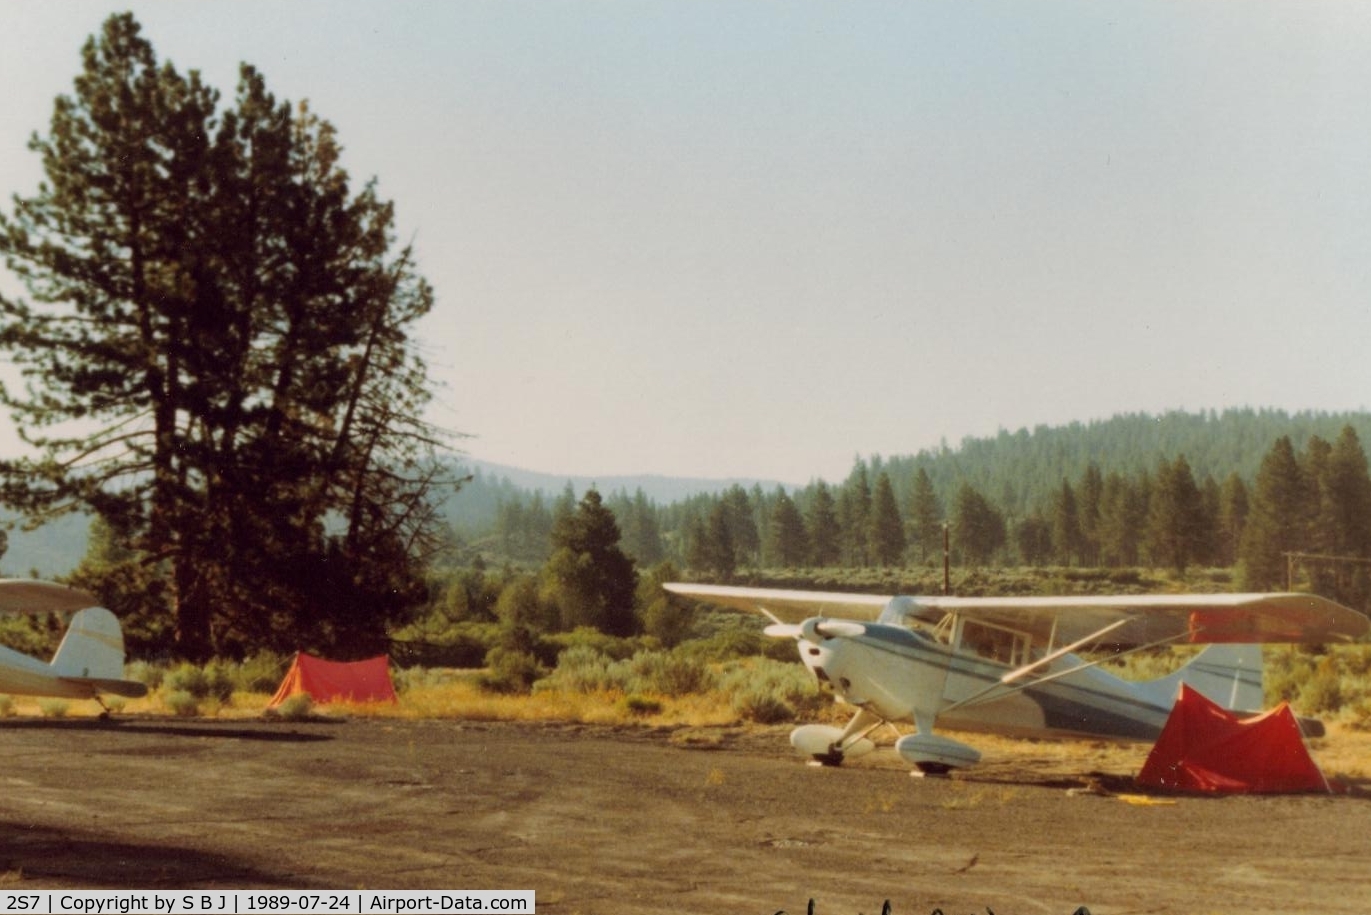 Chiloquin State Airport (2S7) - 68E at Chiloquin airport in Oregon on the second day of a flight to the east coast in 1989.